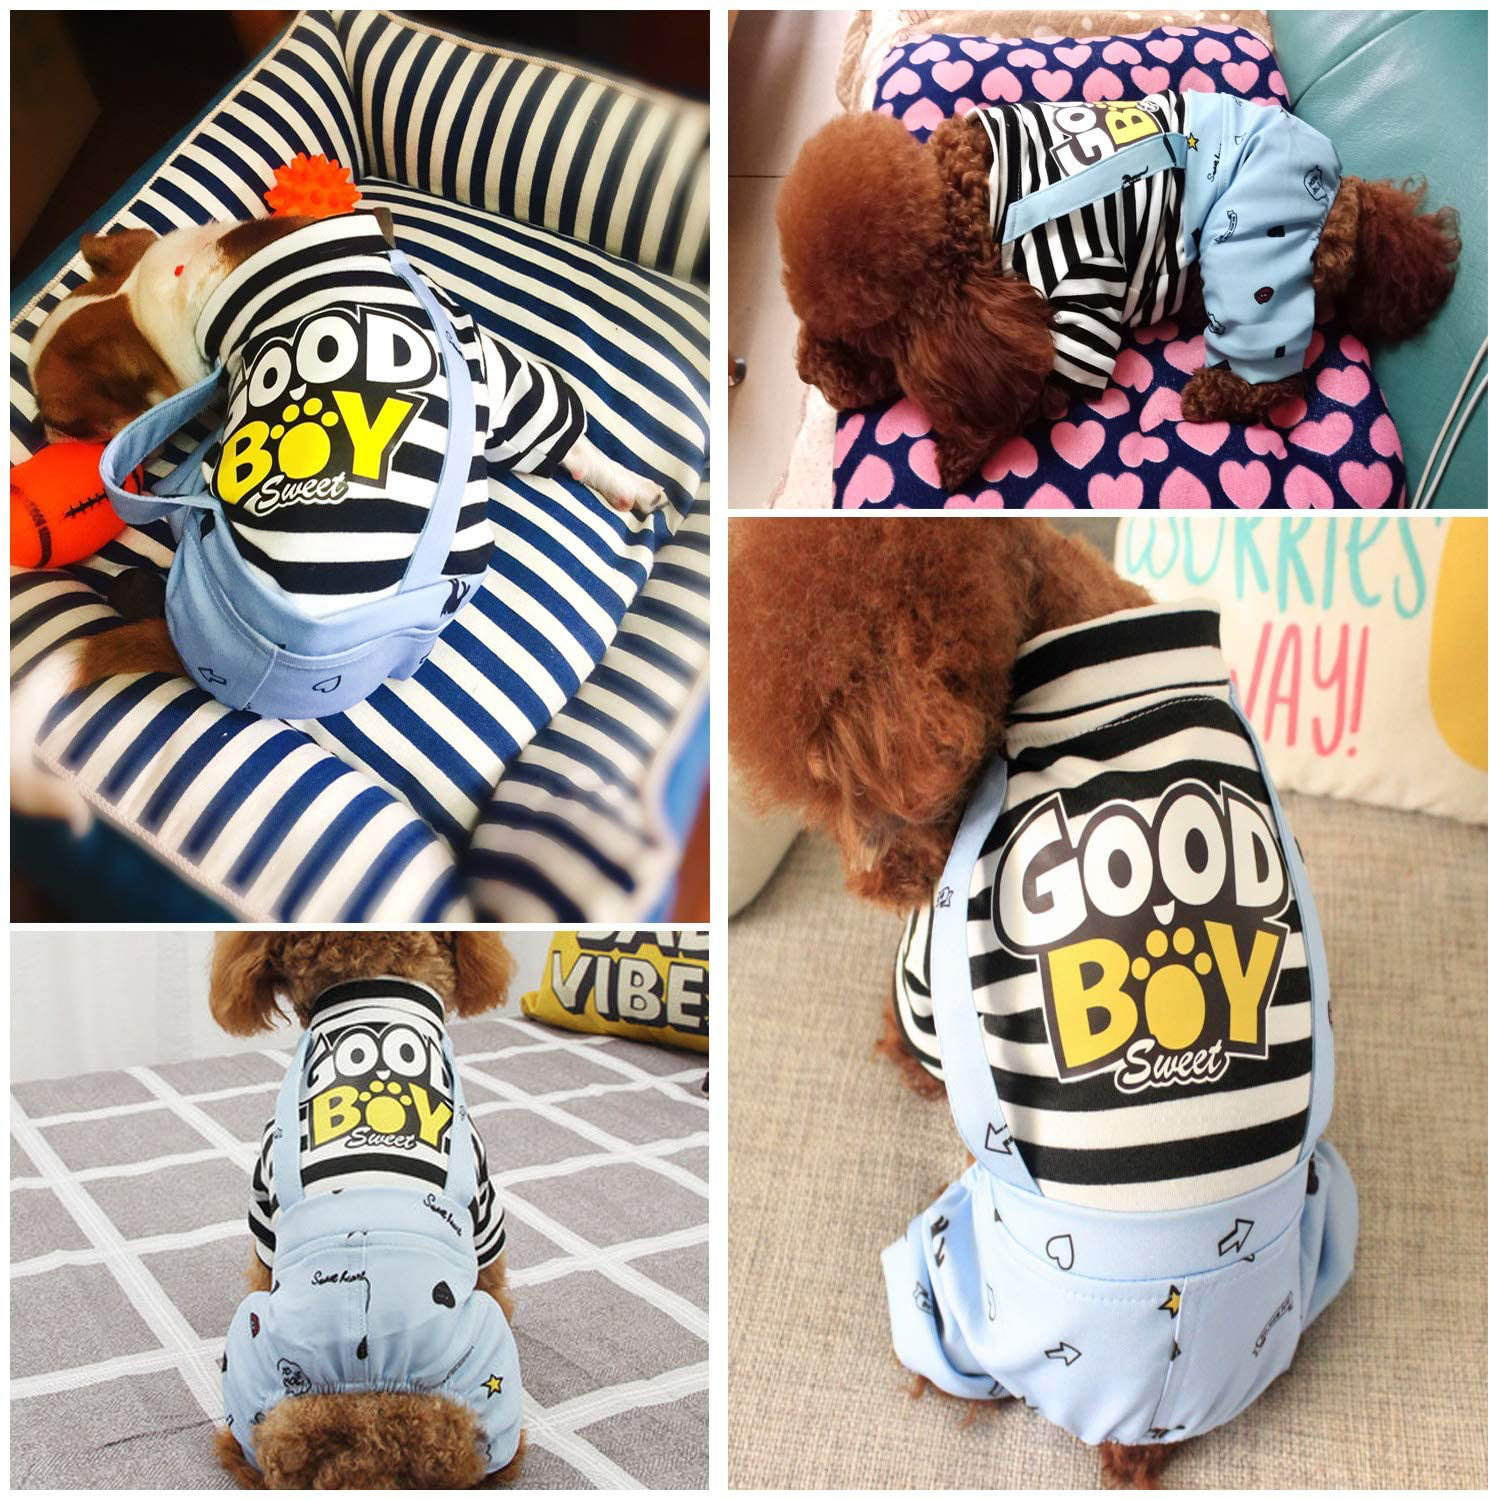 Brocarp Dog Clothes Striped Onesie Puppy Shirt, Cute Dog Pajamas Bodysuit Coat Jumpsuit Overalls Soft Comfort Pjs Apparel Costume, Dog Outfit for Small Medium Large Dogs Cats Kitten Boy Girl